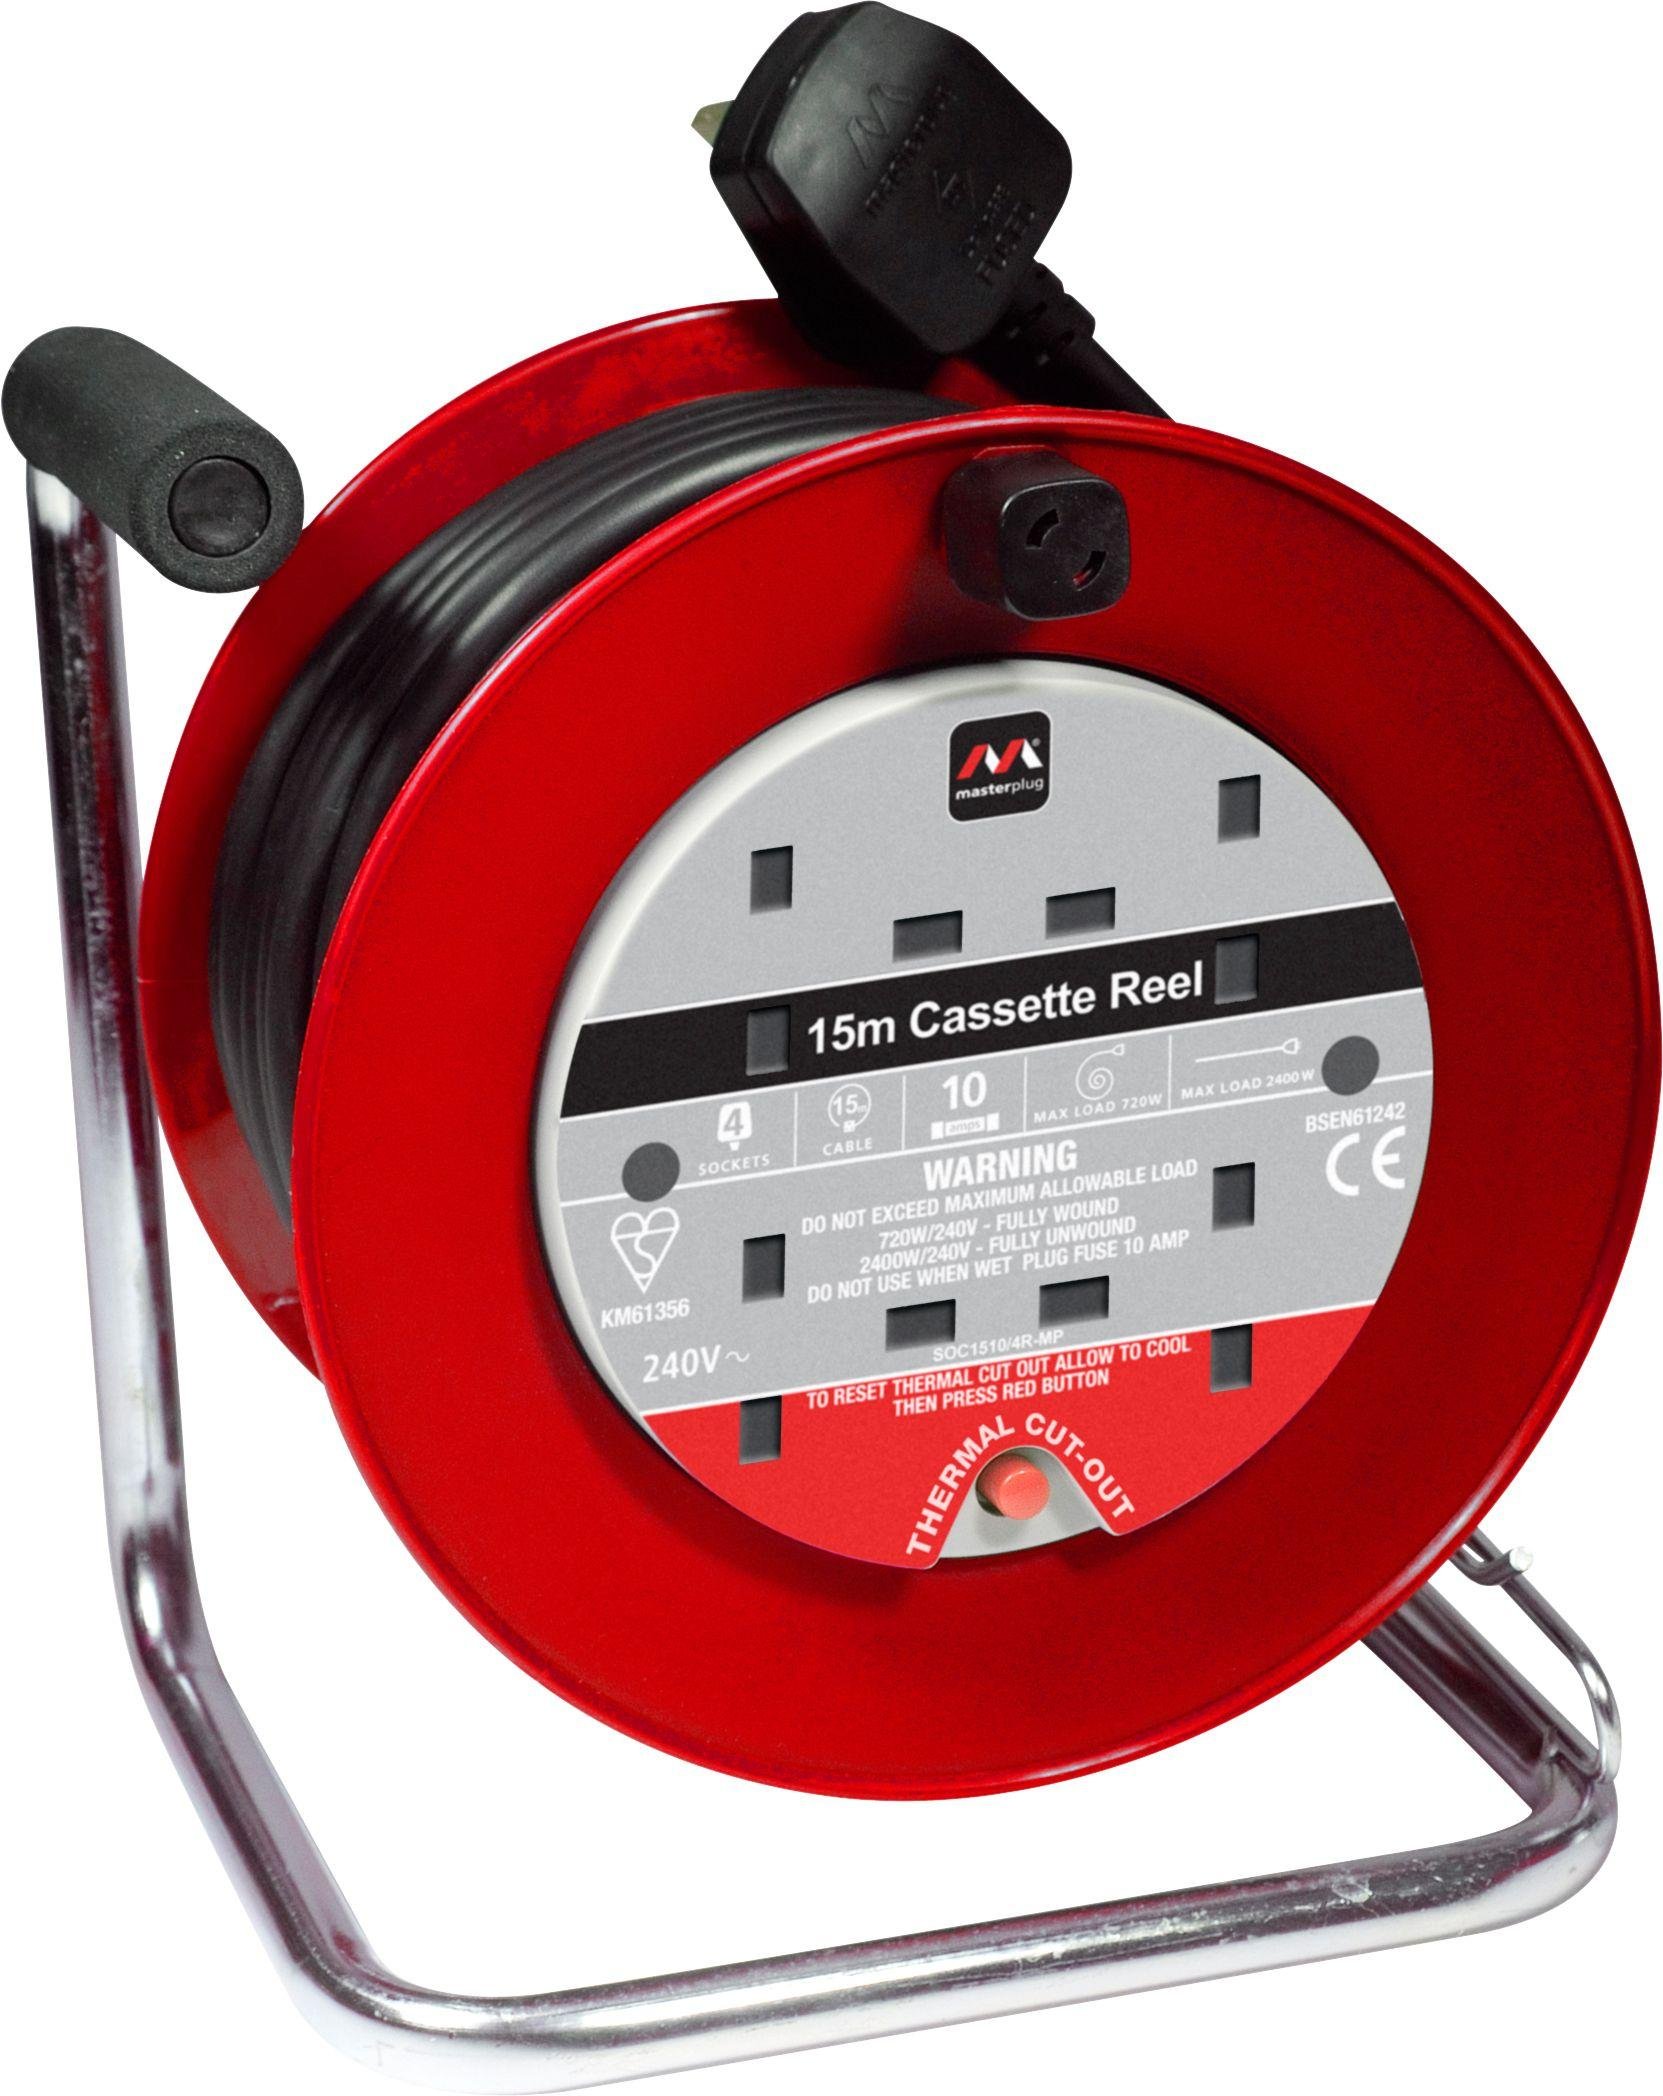 Review of Masterplug 4 Socket Cable Reel - 15m